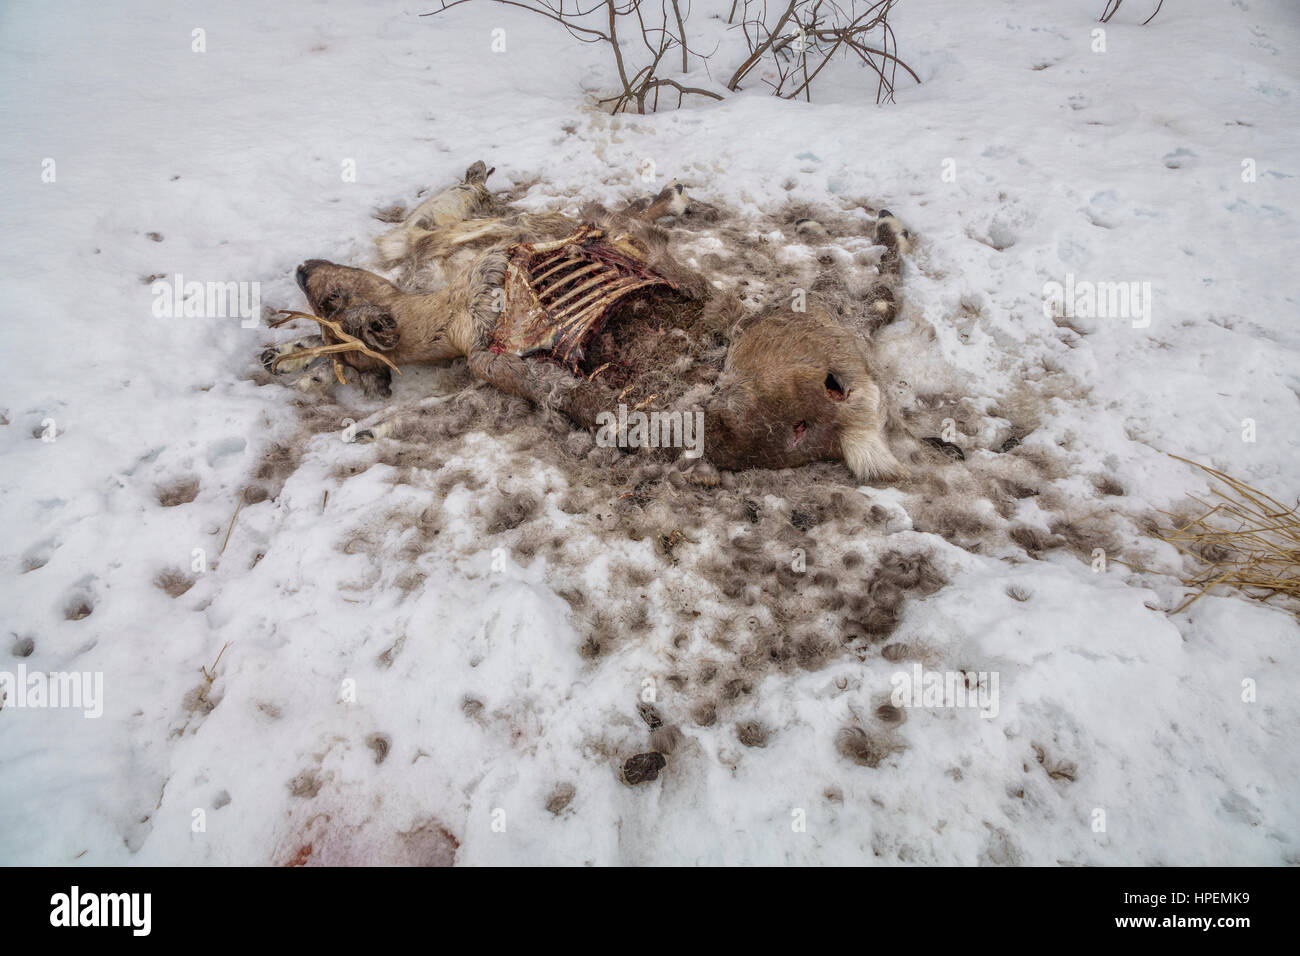 Dead Reindeer, The Laponian Area, Northern Sweden Stock Photo